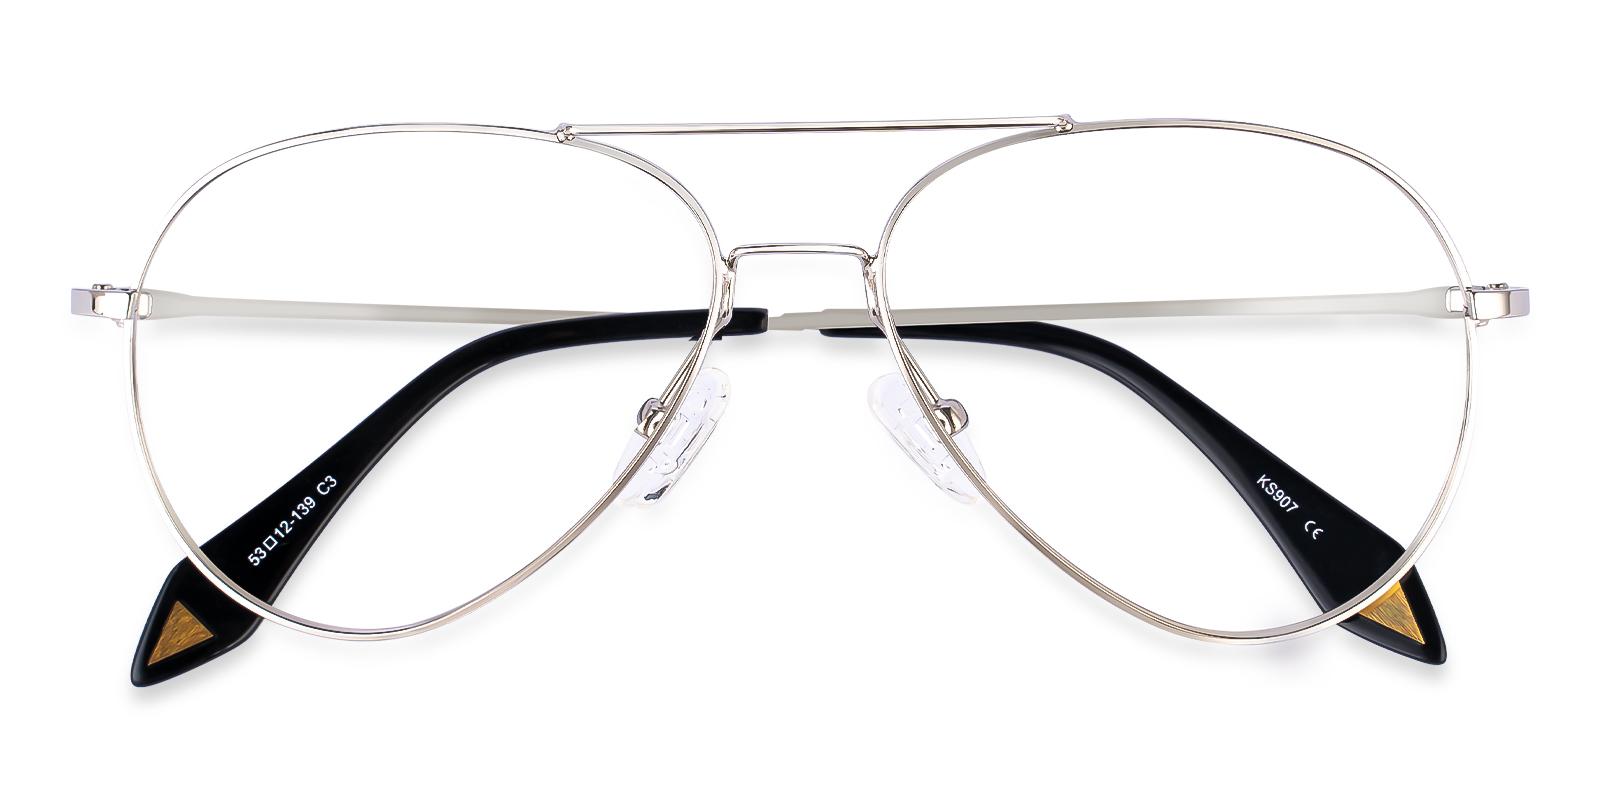 Malawi Silver Metal Eyeglasses , NosePads Frames from ABBE Glasses